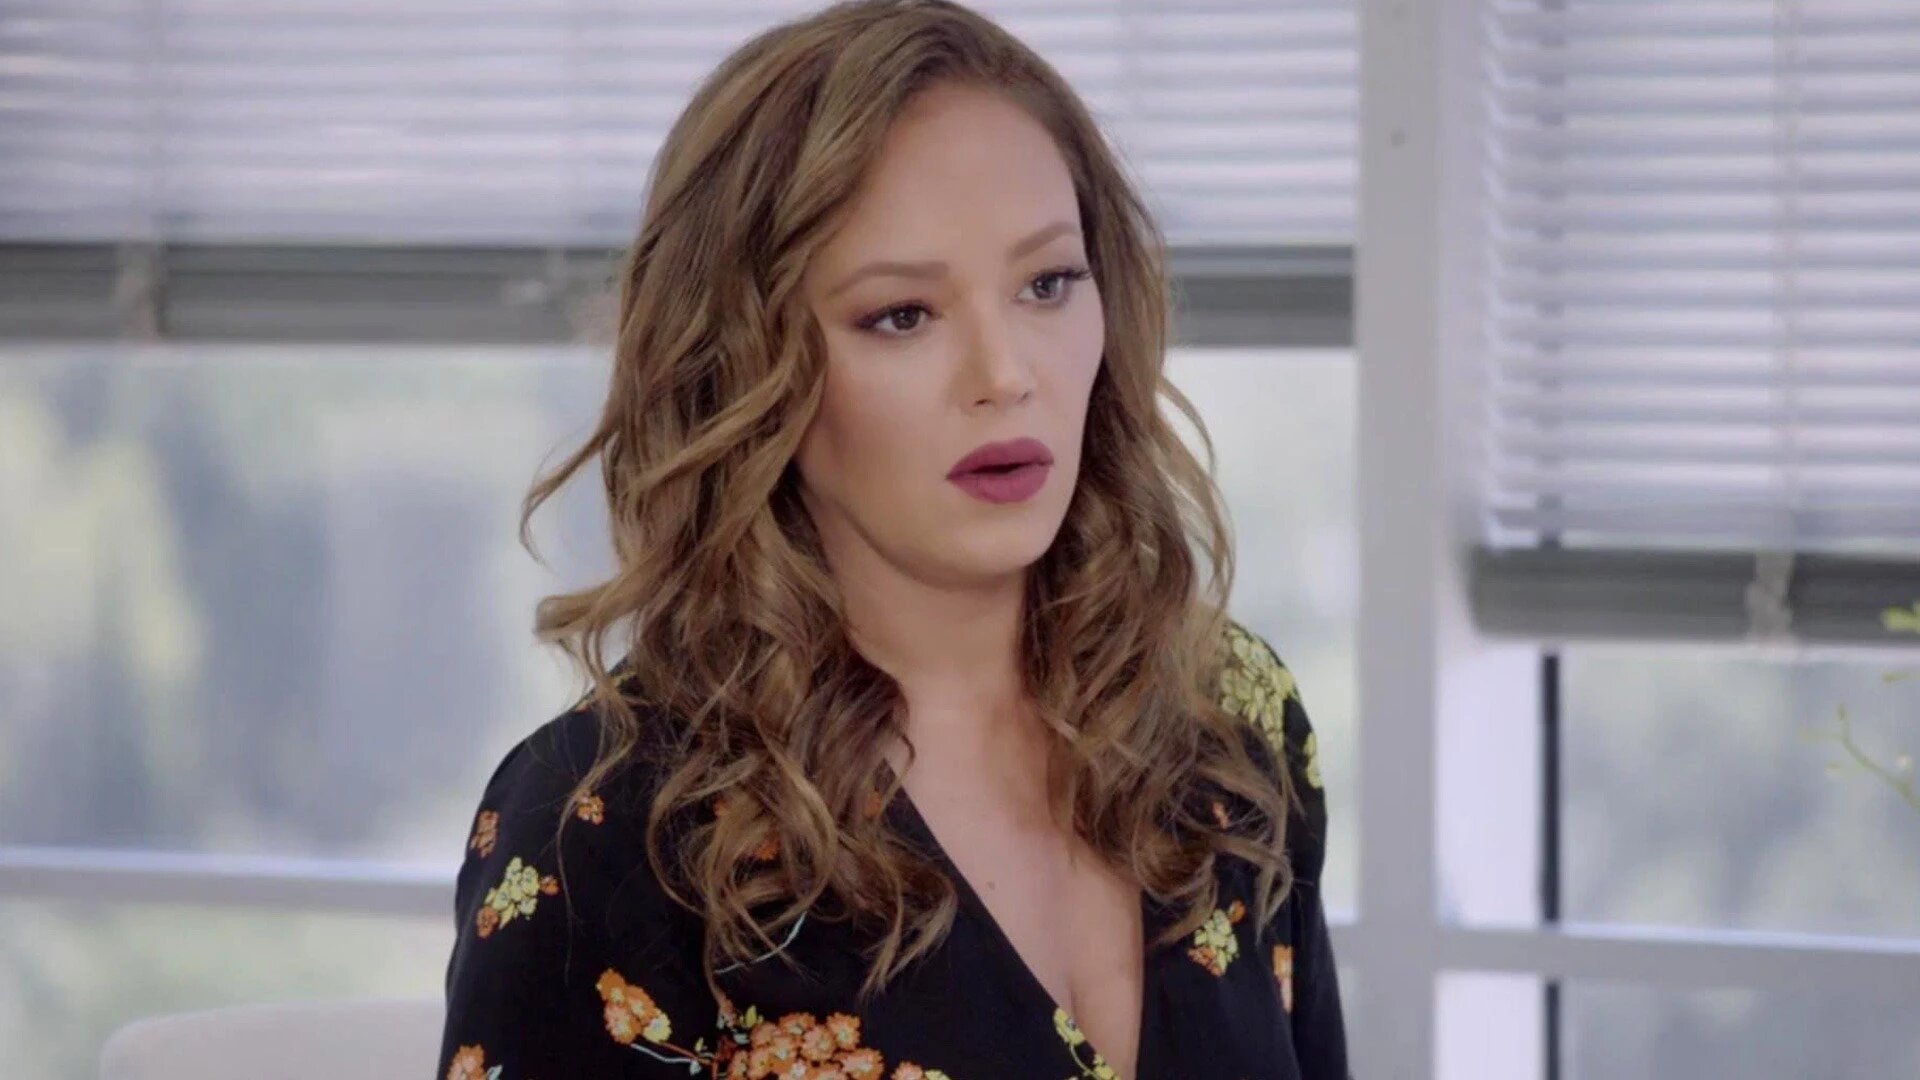 Leah Remini: Scientology and the Aftermath S2E5 The Rise of David Miscavige